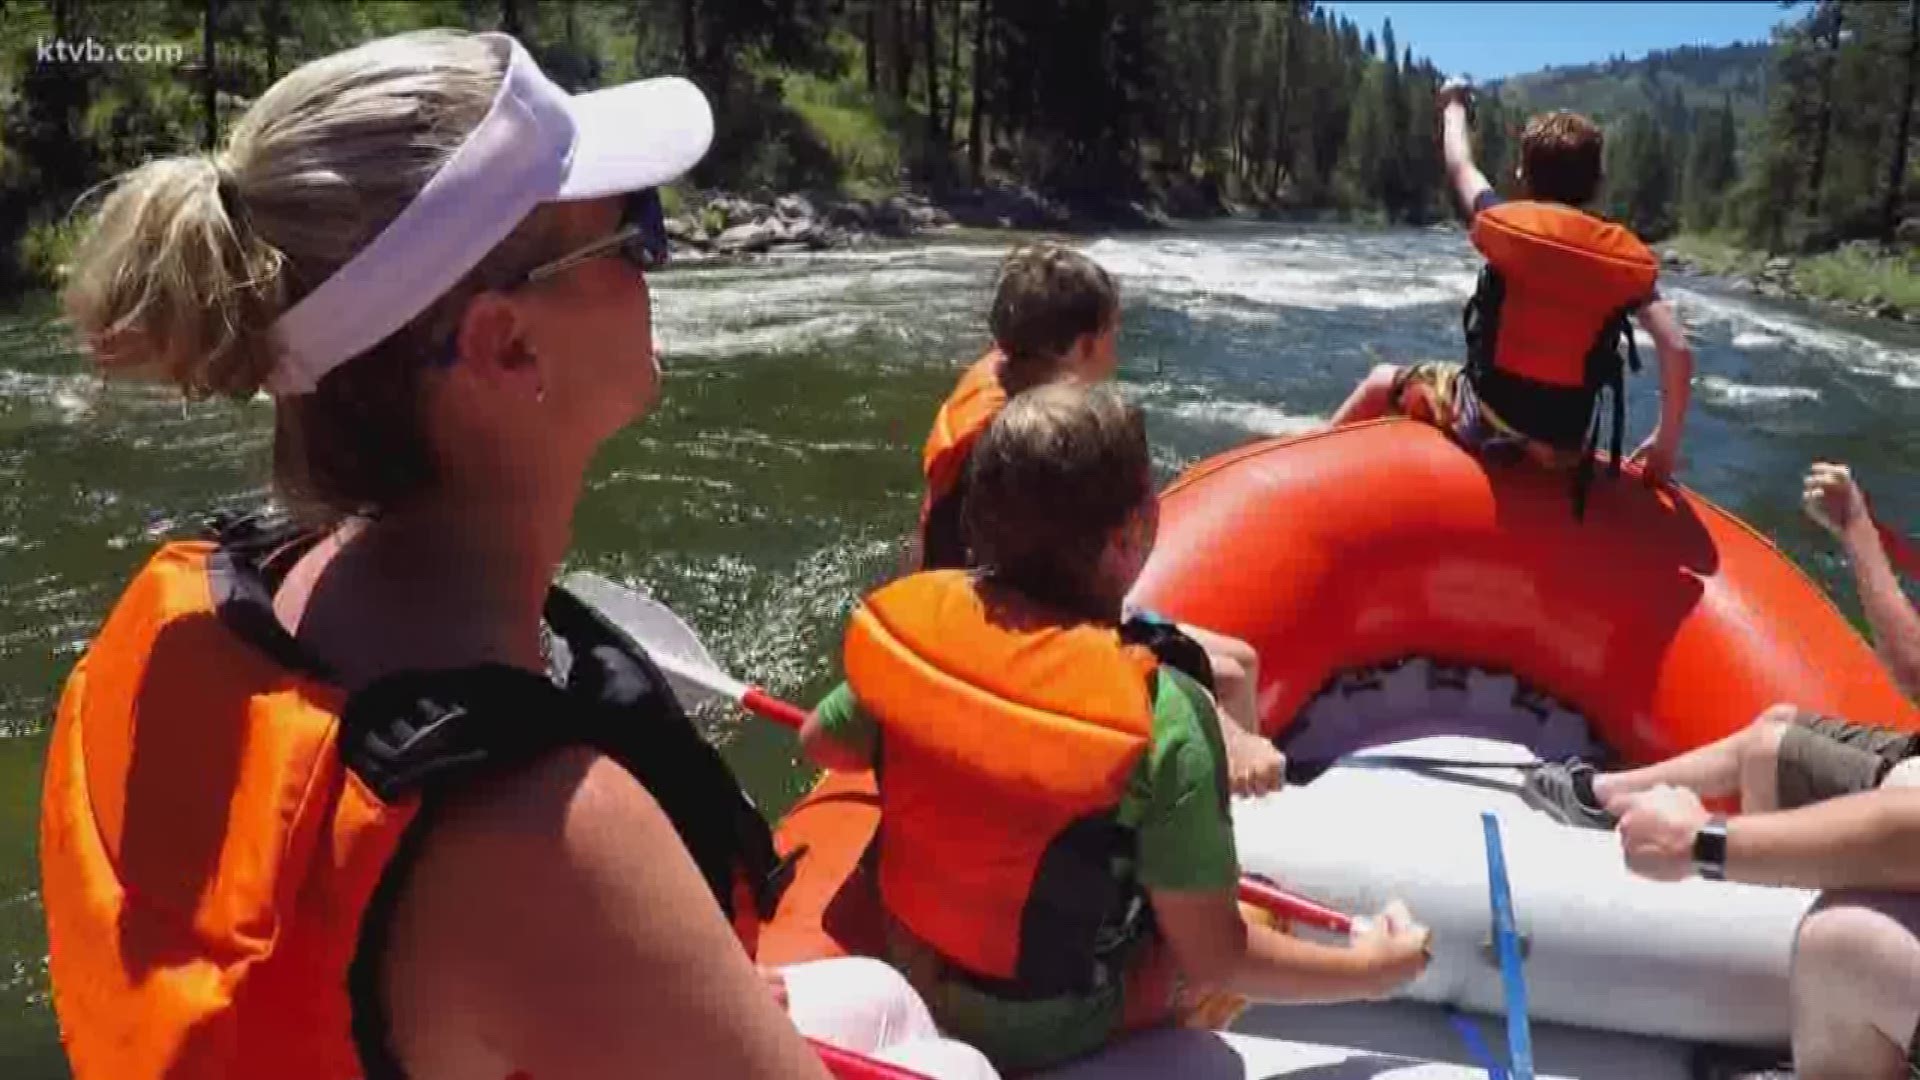 River rafting is the definition of Idaho life for so many people living and visiting here. Dozens of Caldwell kids had the chance to raft the Main section of the Payette for the first time on Wednesday afternoon.